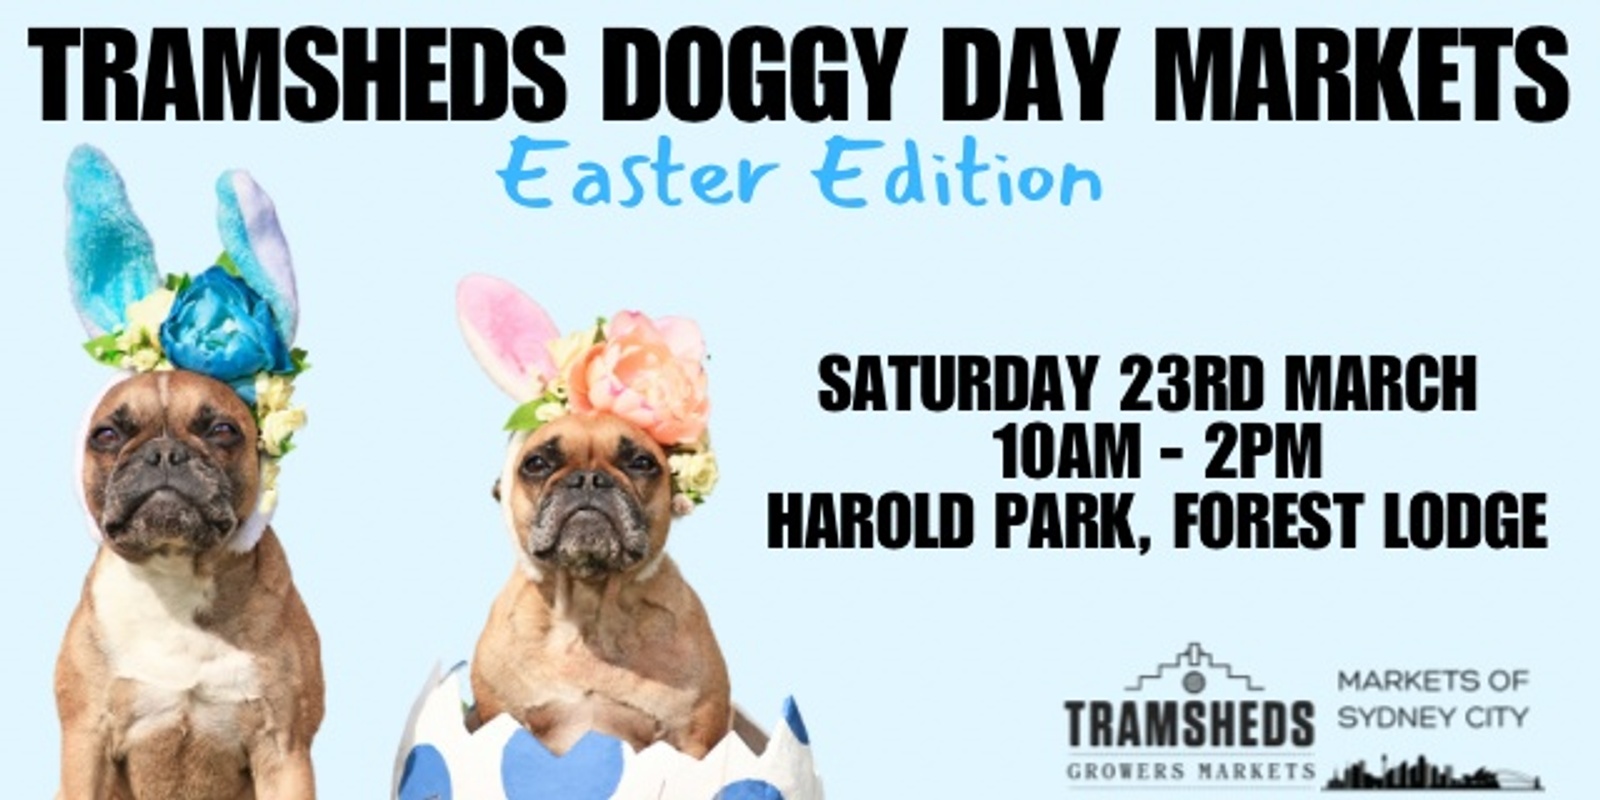 Banner image for Tramsheds Doggy Day Markets